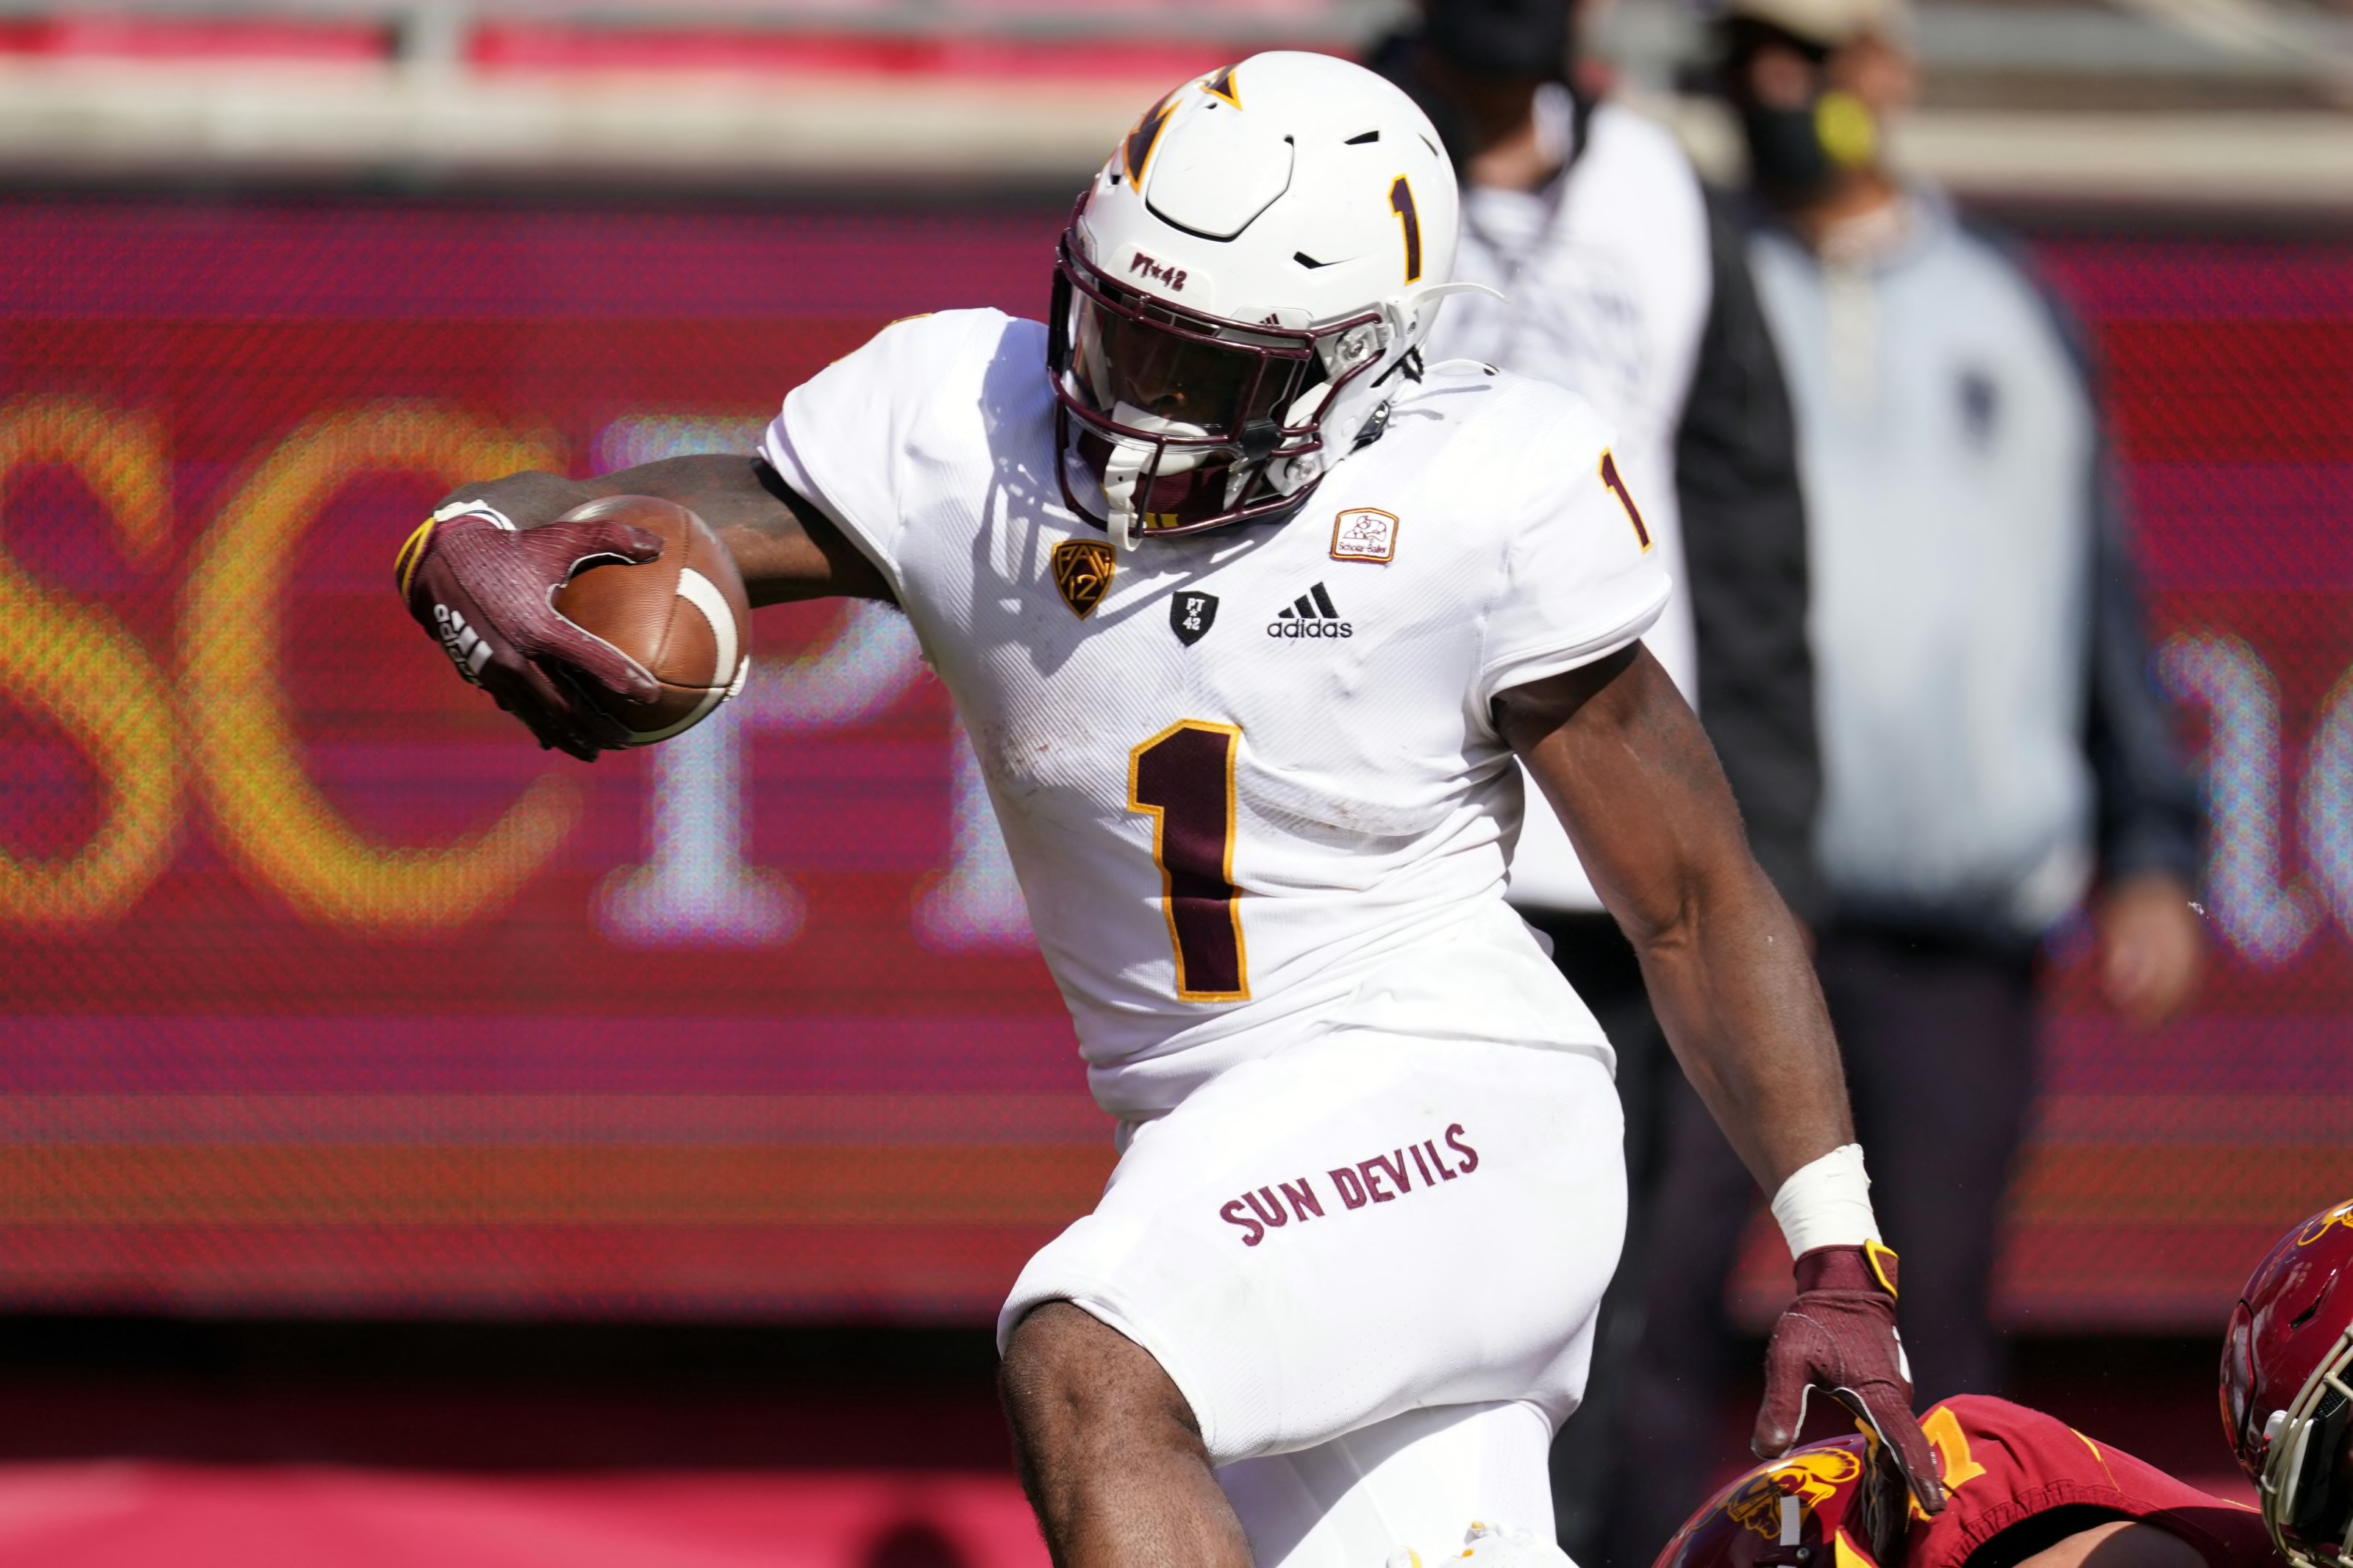 Arizona State Football: 3 takeaways from heartbreaking loss at USC - Page 2